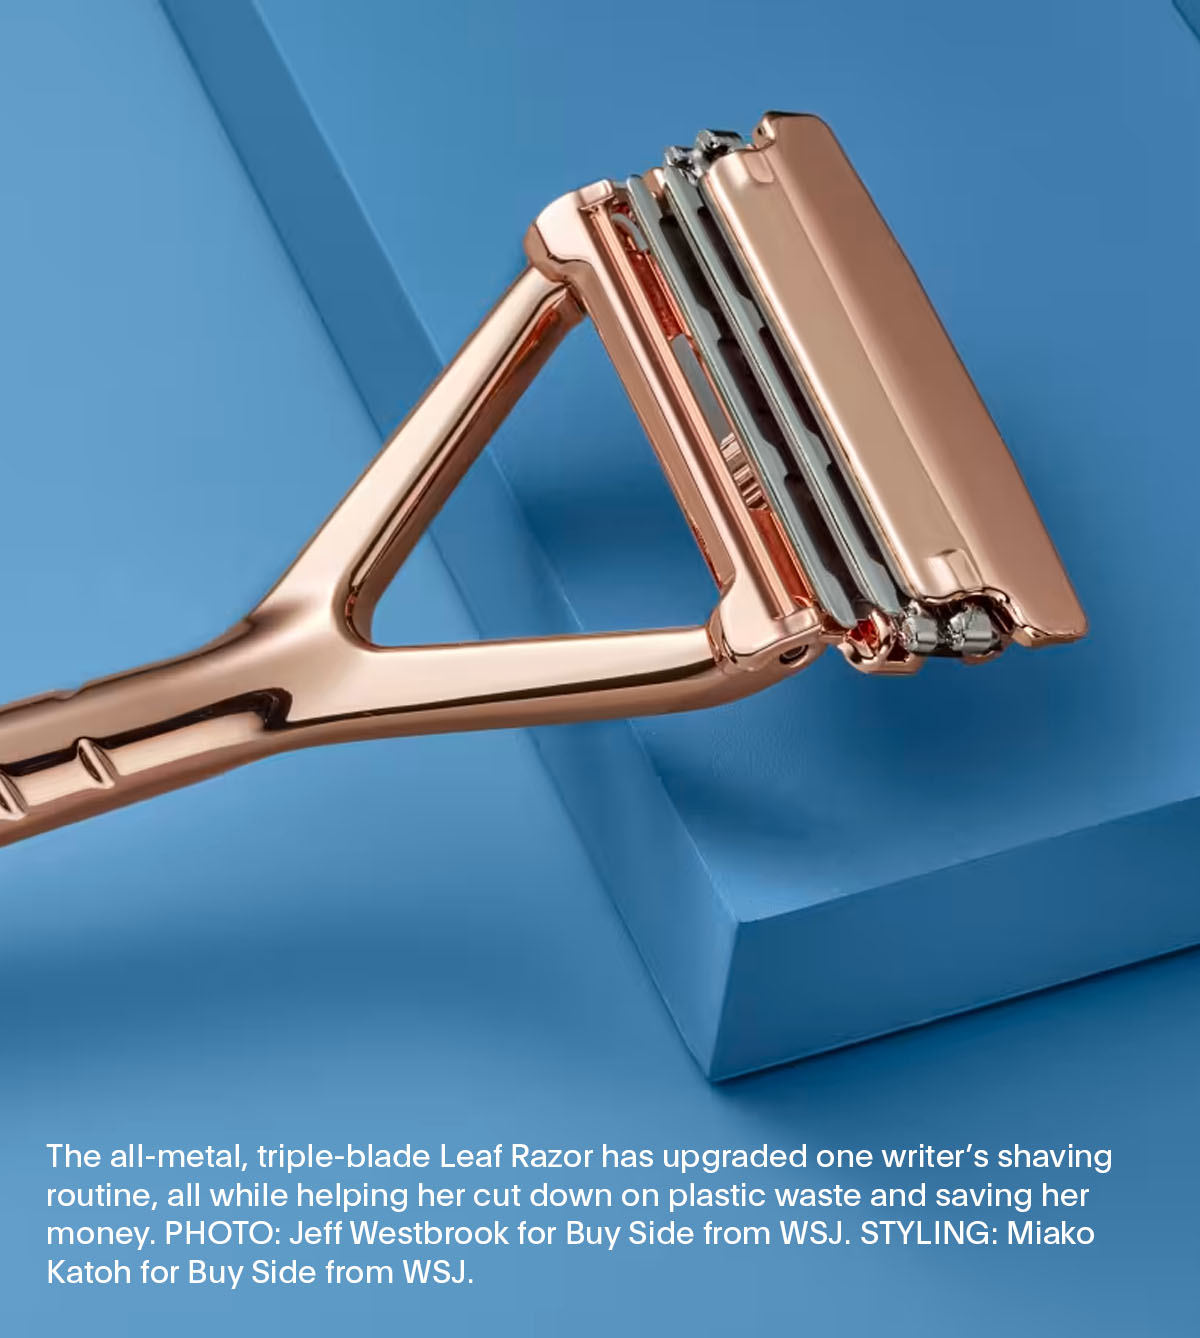 The all-metal, triple-blade Leaf Razor has upgraded one writer’s shaving routine, all while helping her cut down on plastic waste and saving her money. PHOTO: Jeff Westbrook for Buy Side from WSJ. STYLING: Miako Katoh for Buy Side from WSJ.